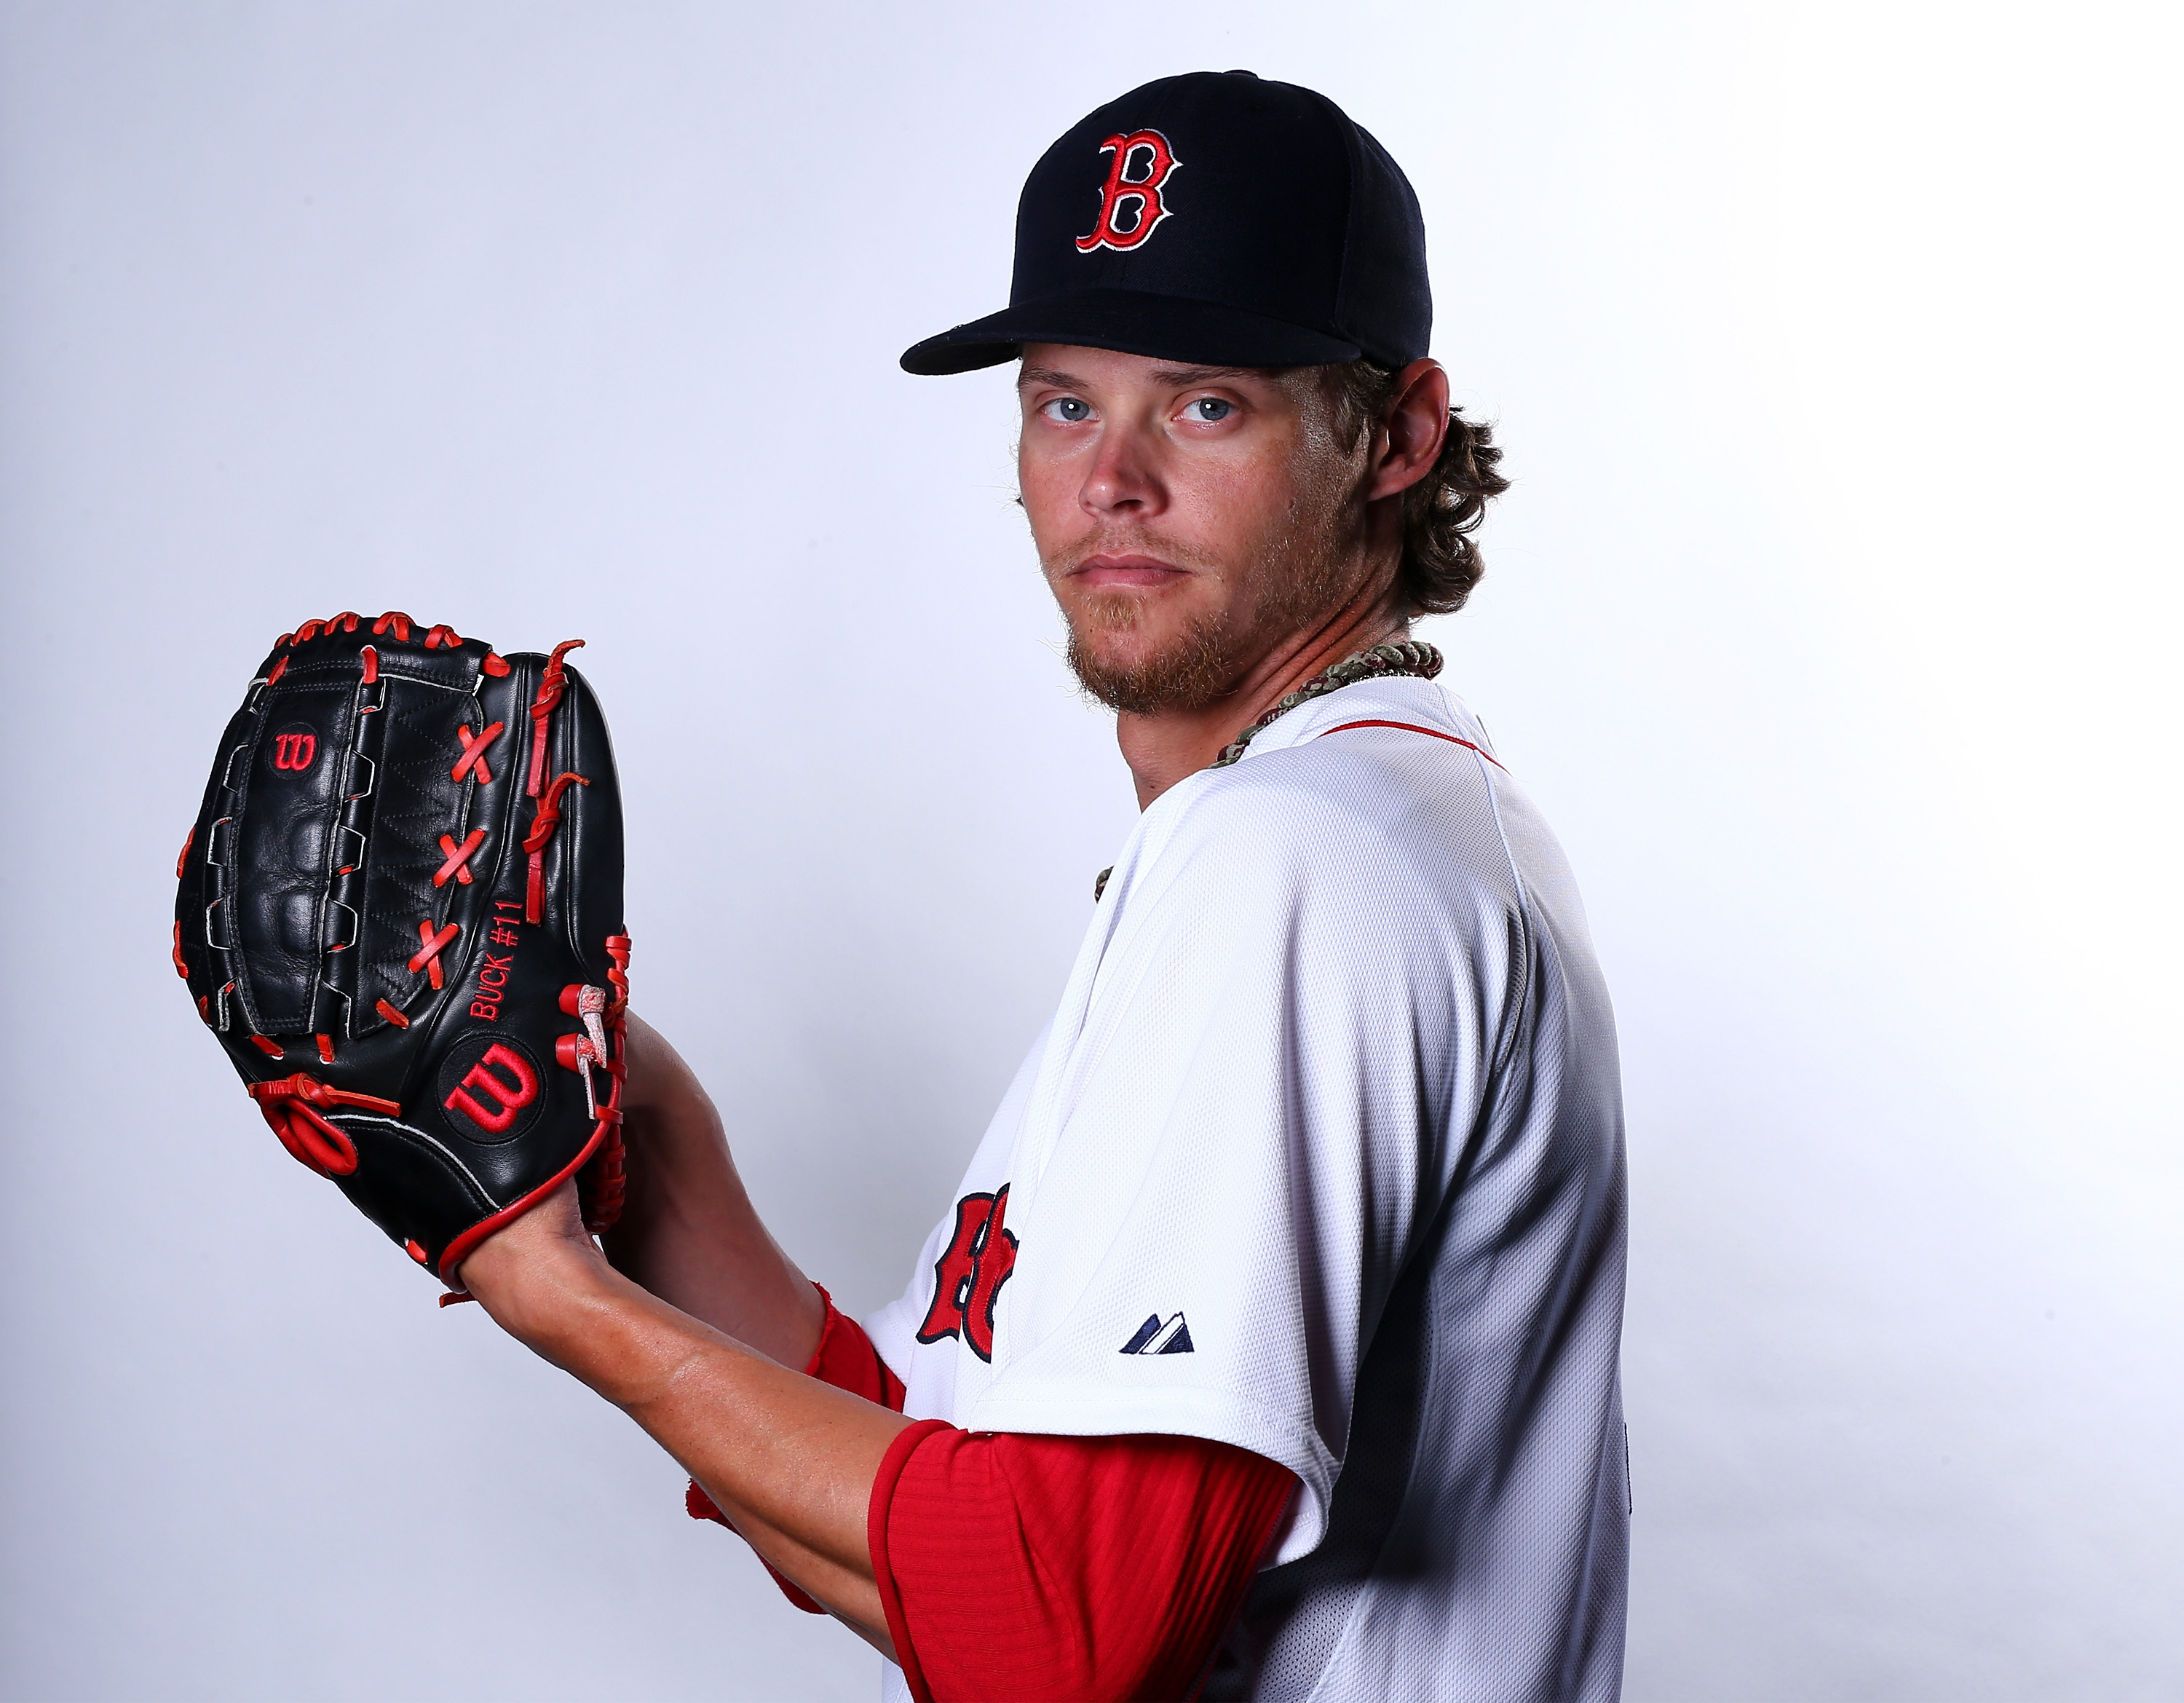 Clay Buchholz poses for a portrait on March 1, 2015 at JetBlue Park in Fort Myers, Florida. (Photo by Elsa/Getty Images)